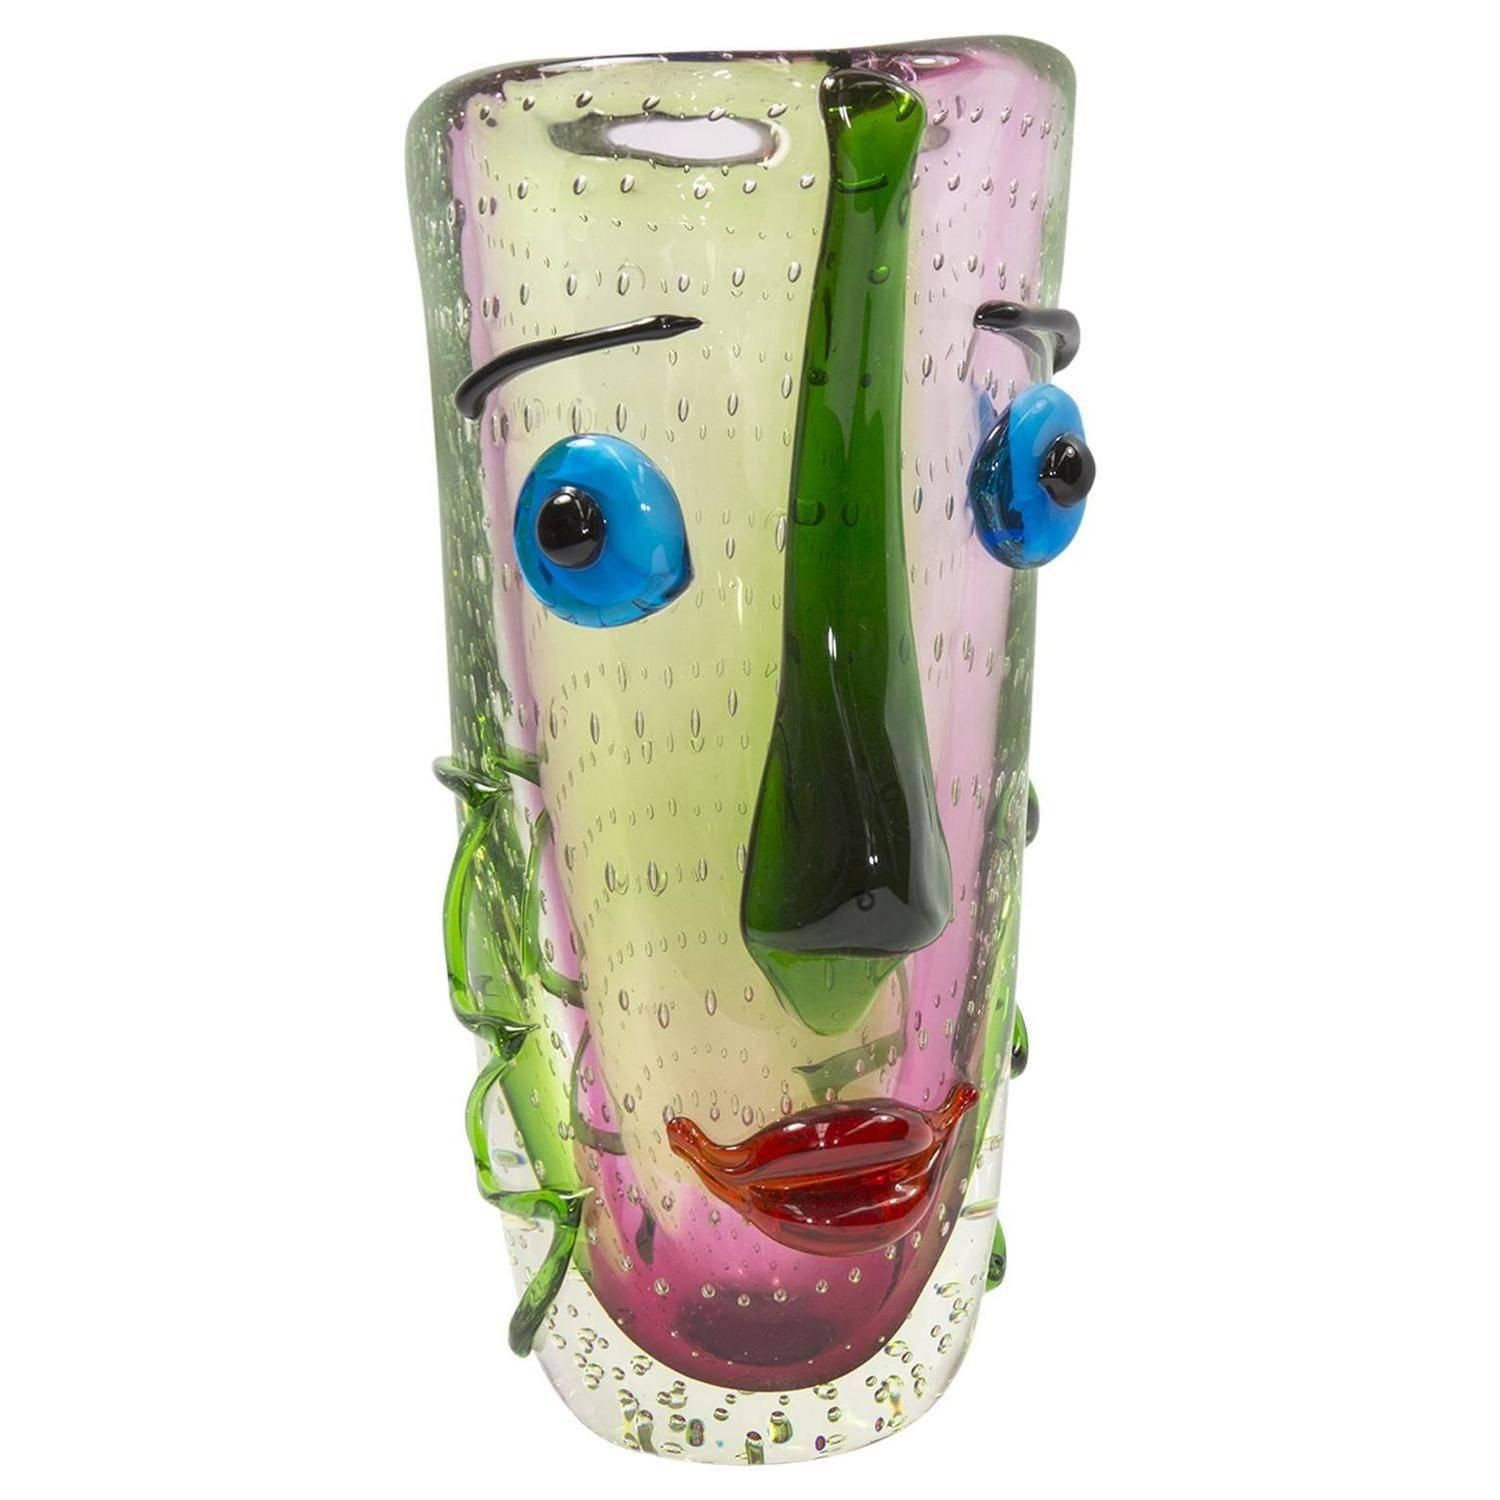 29 Nice Red Glass Vases for Sale 2024 free download red glass vases for sale of fabulous large murano multicolored abstract picasso face art glass in fabulous large murano multicolored abstract picasso face art glass vase